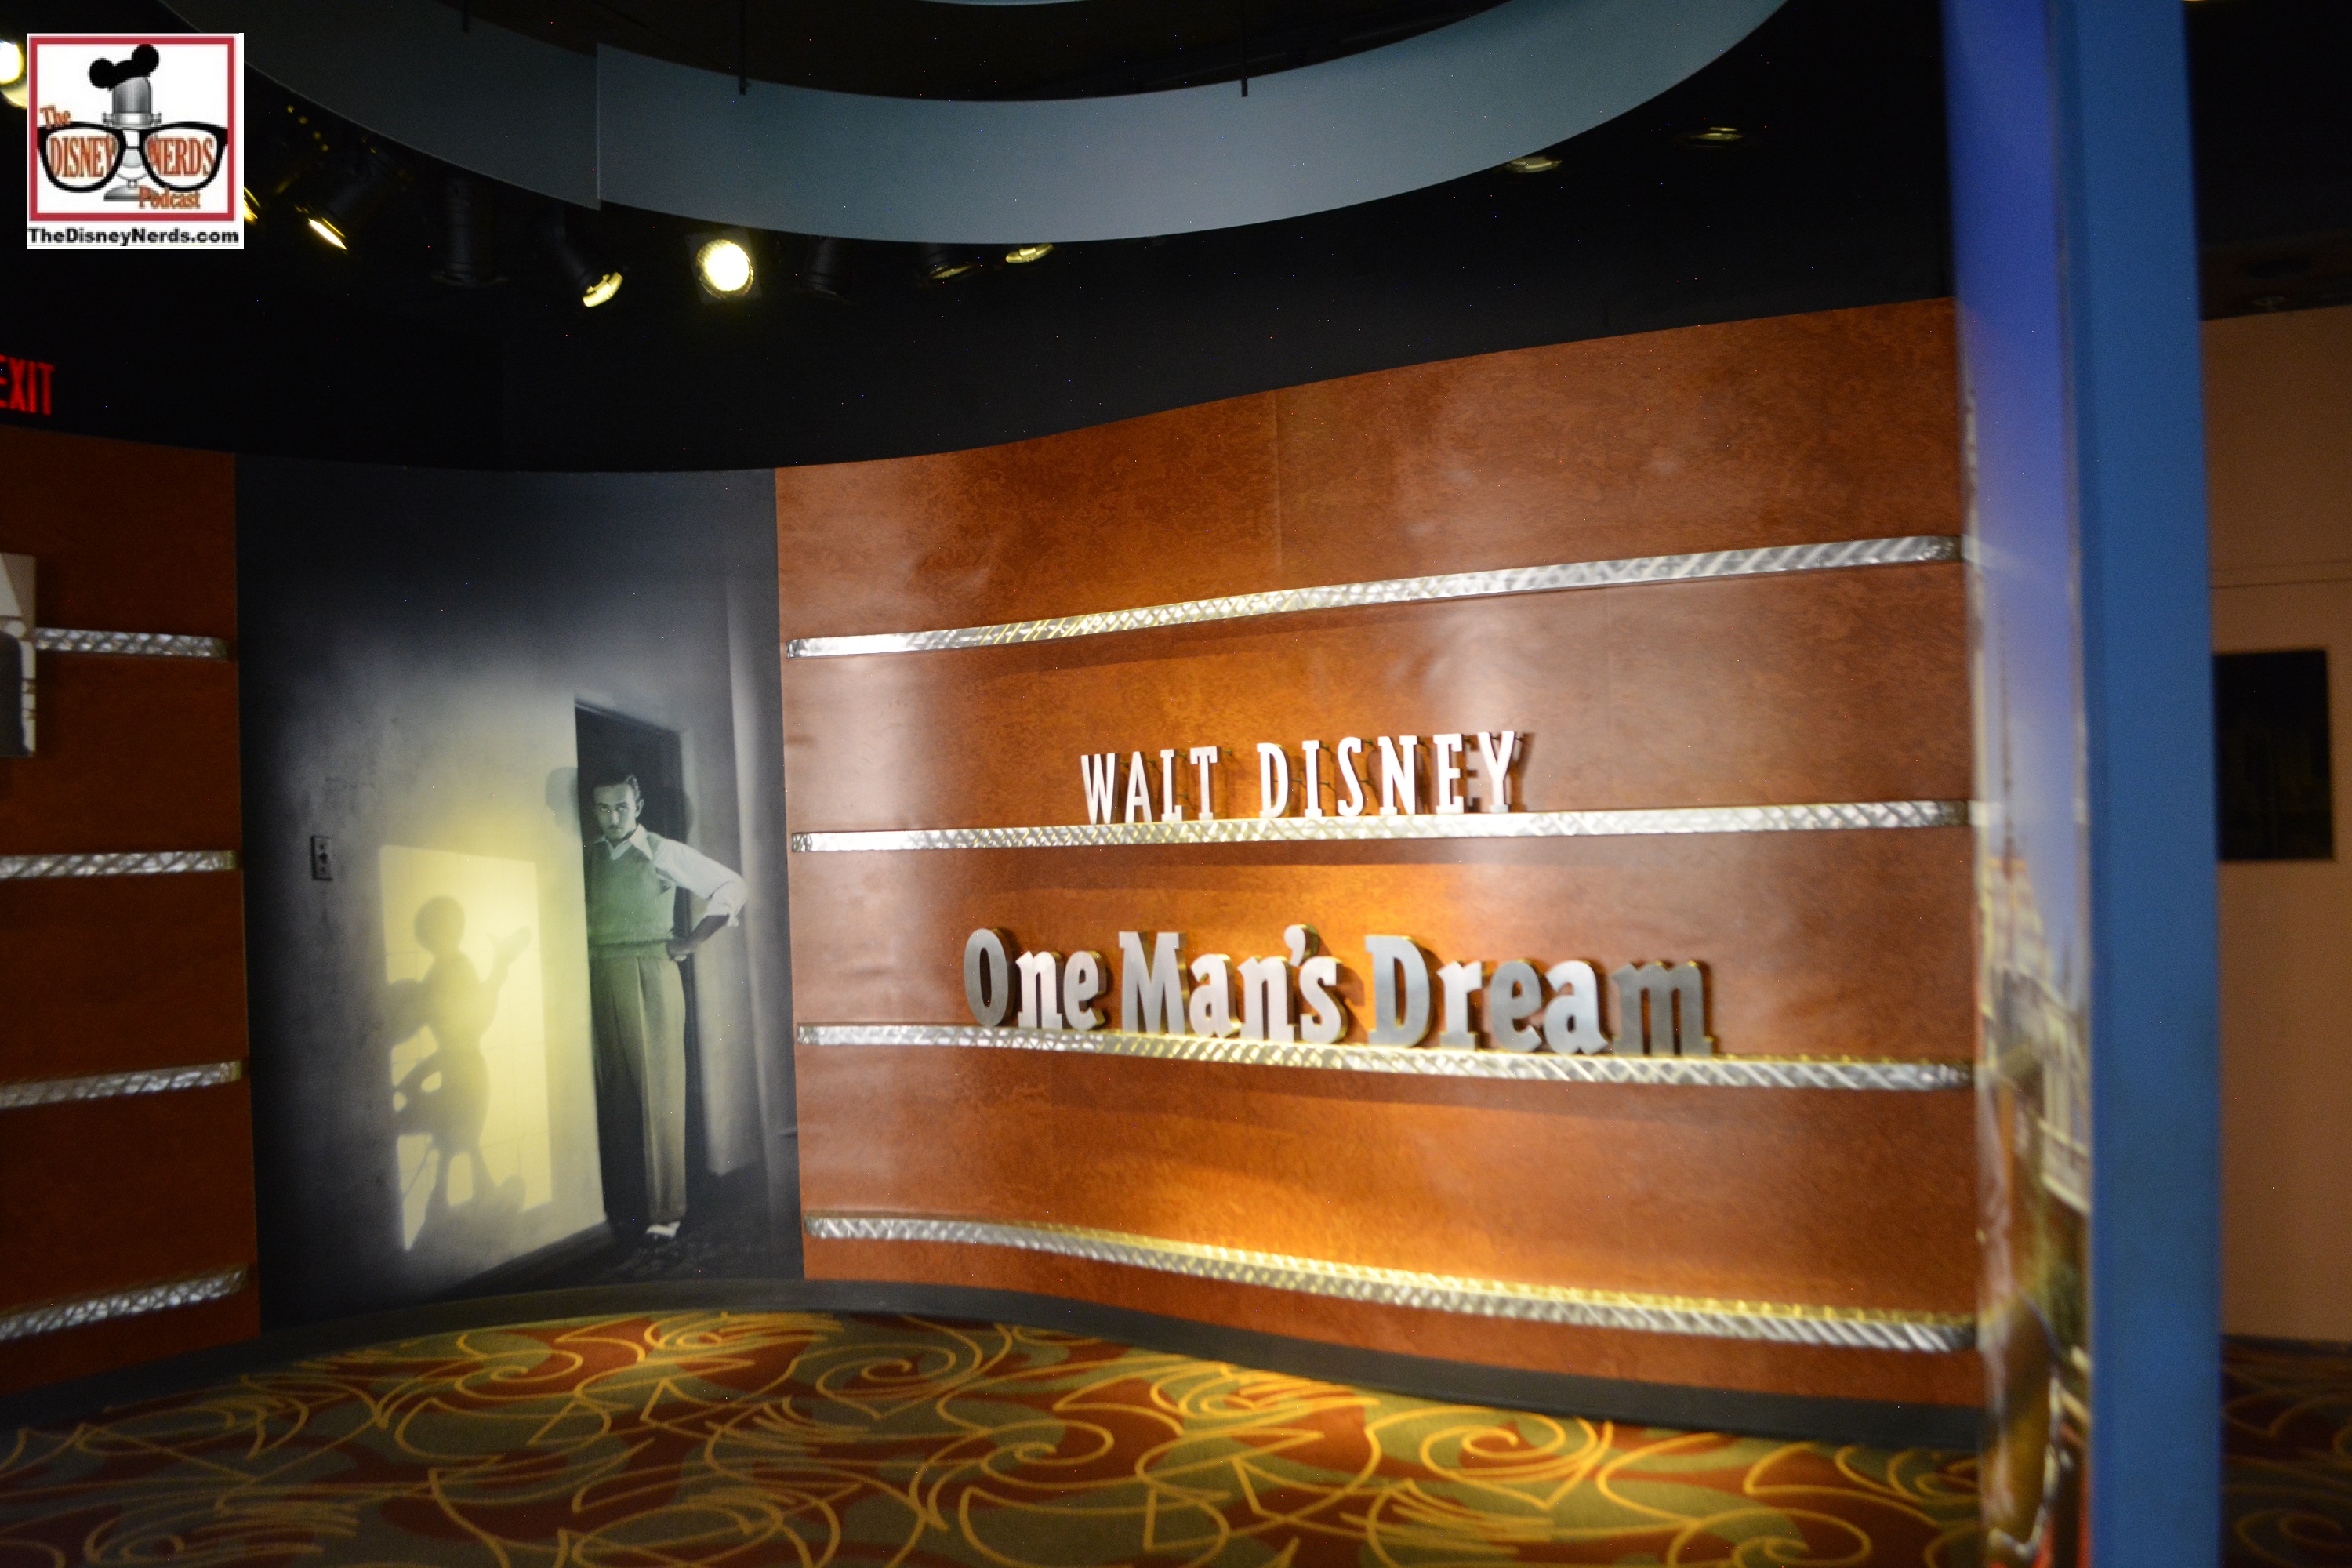 One Man's Dream... If you're headed to studios anytime soon, be sure to take a visit. Look around, and imaging the location in 18 months.... Your standing in the middle of toy story land! I'm gonna miss you One Man's Dream.